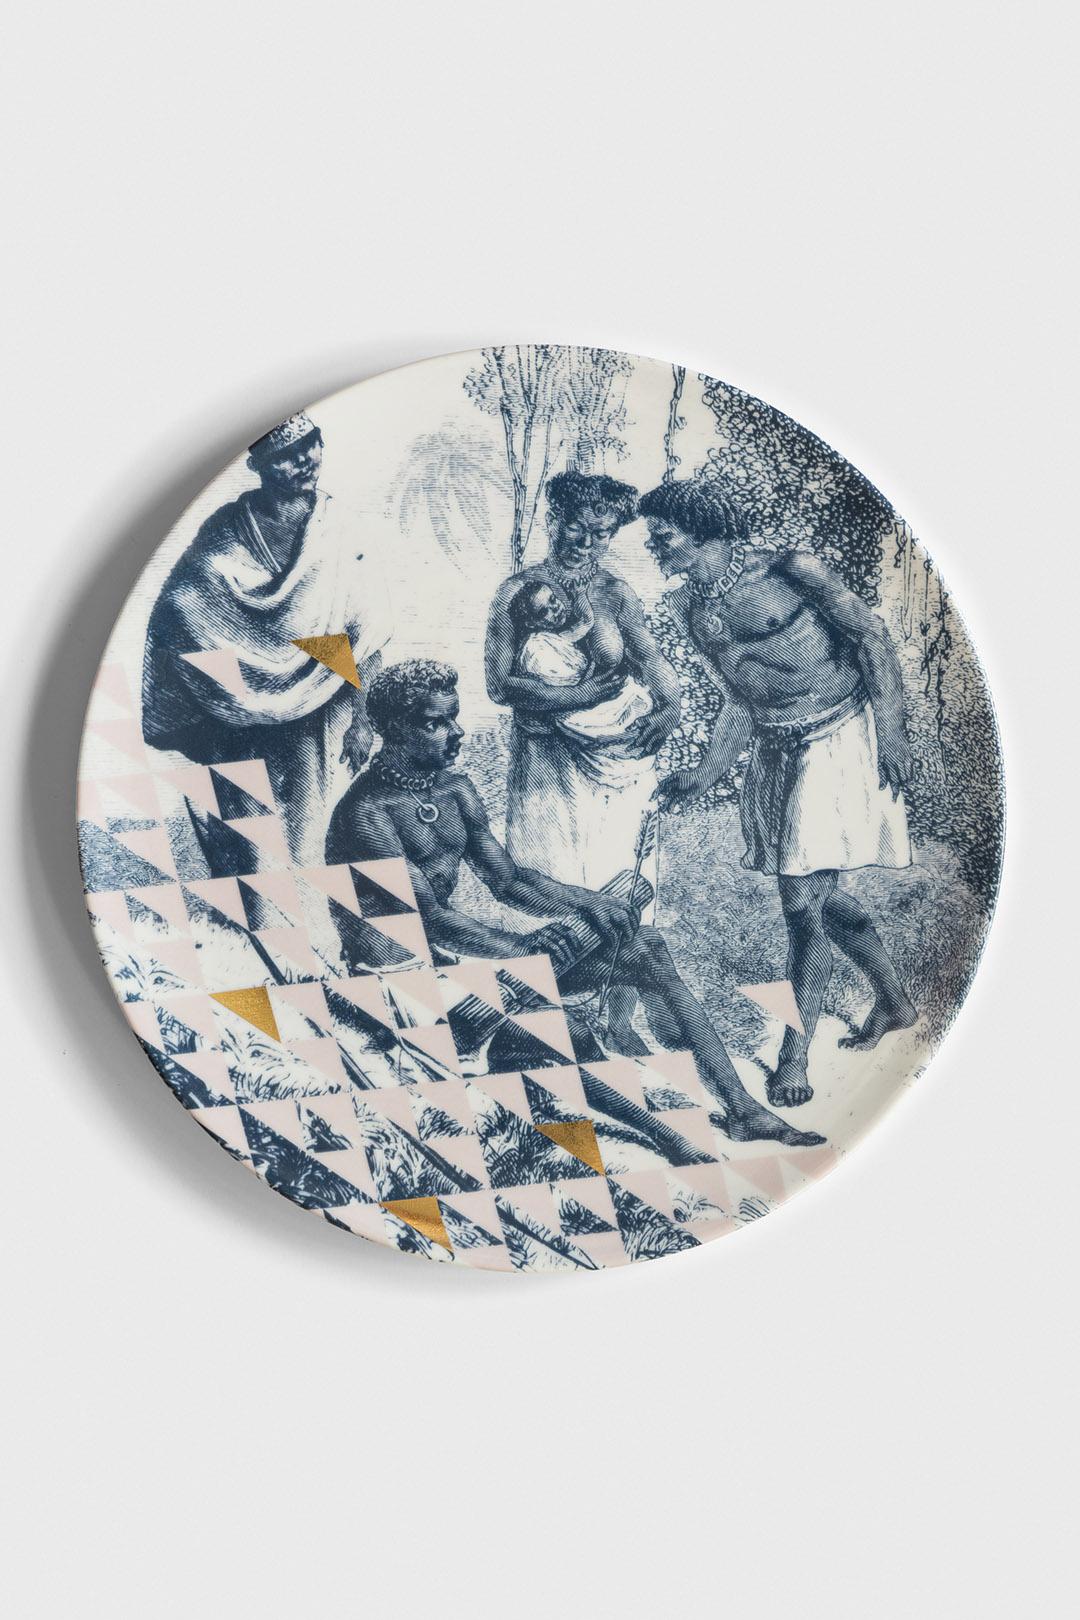 Handmade in Italy, designed by Vito Nesta.

This porcelain dinner plate representing a beautiful image from Kenya is available also in sets of 3 or 6 plates with different images from Kenya (upon request).